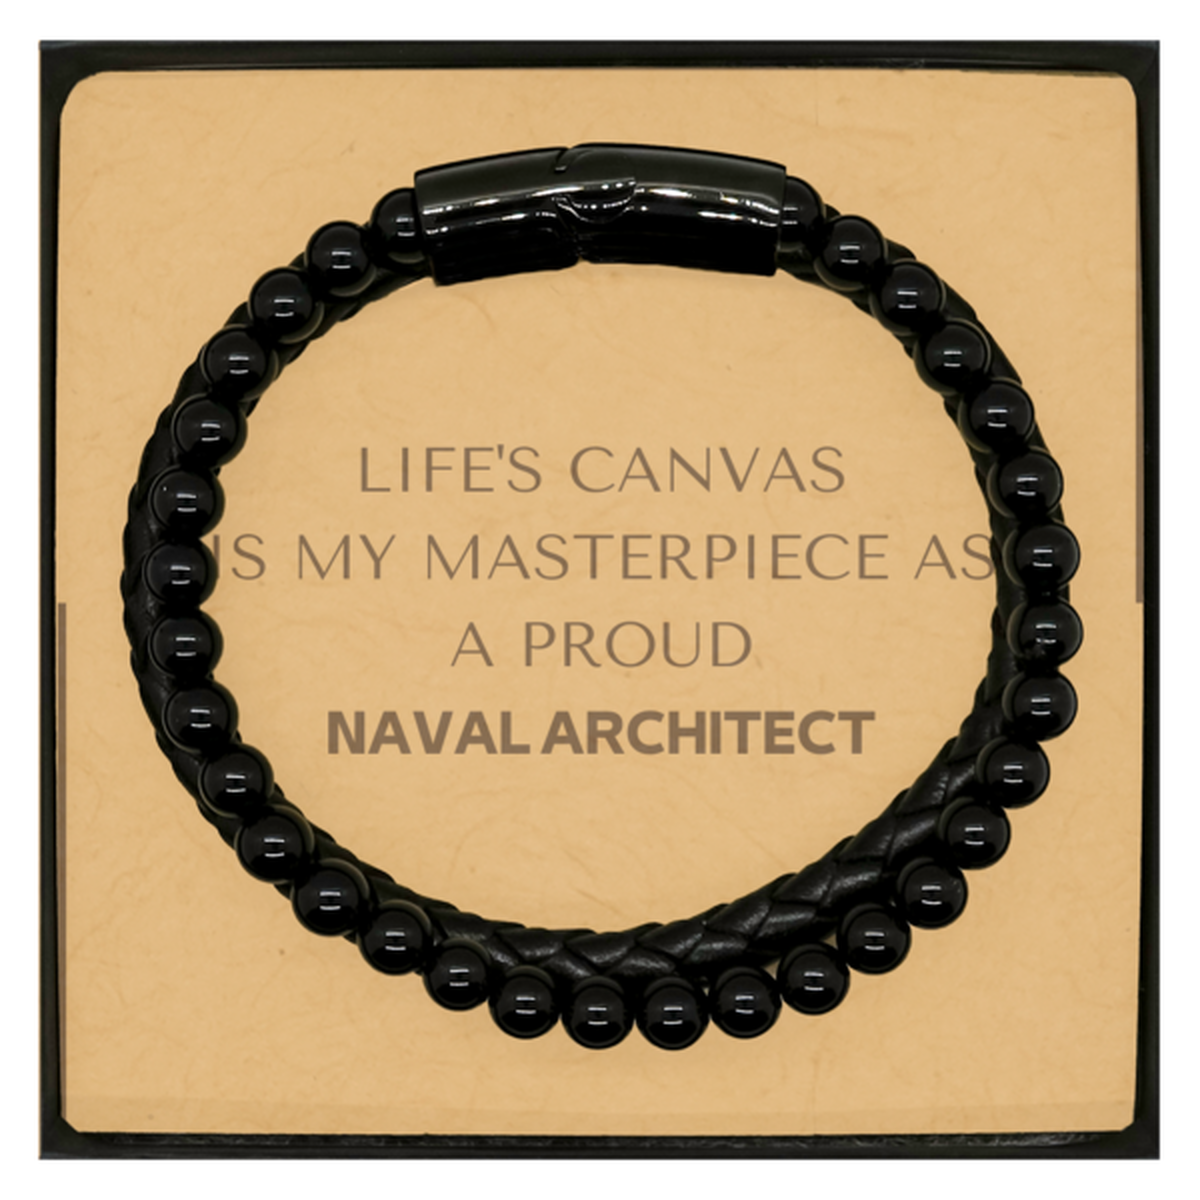 Proud Naval Architect Gifts, Life's canvas is my masterpiece, Epic Birthday Christmas Unique Stone Leather Bracelets For Naval Architect, Coworkers, Men, Women, Friends